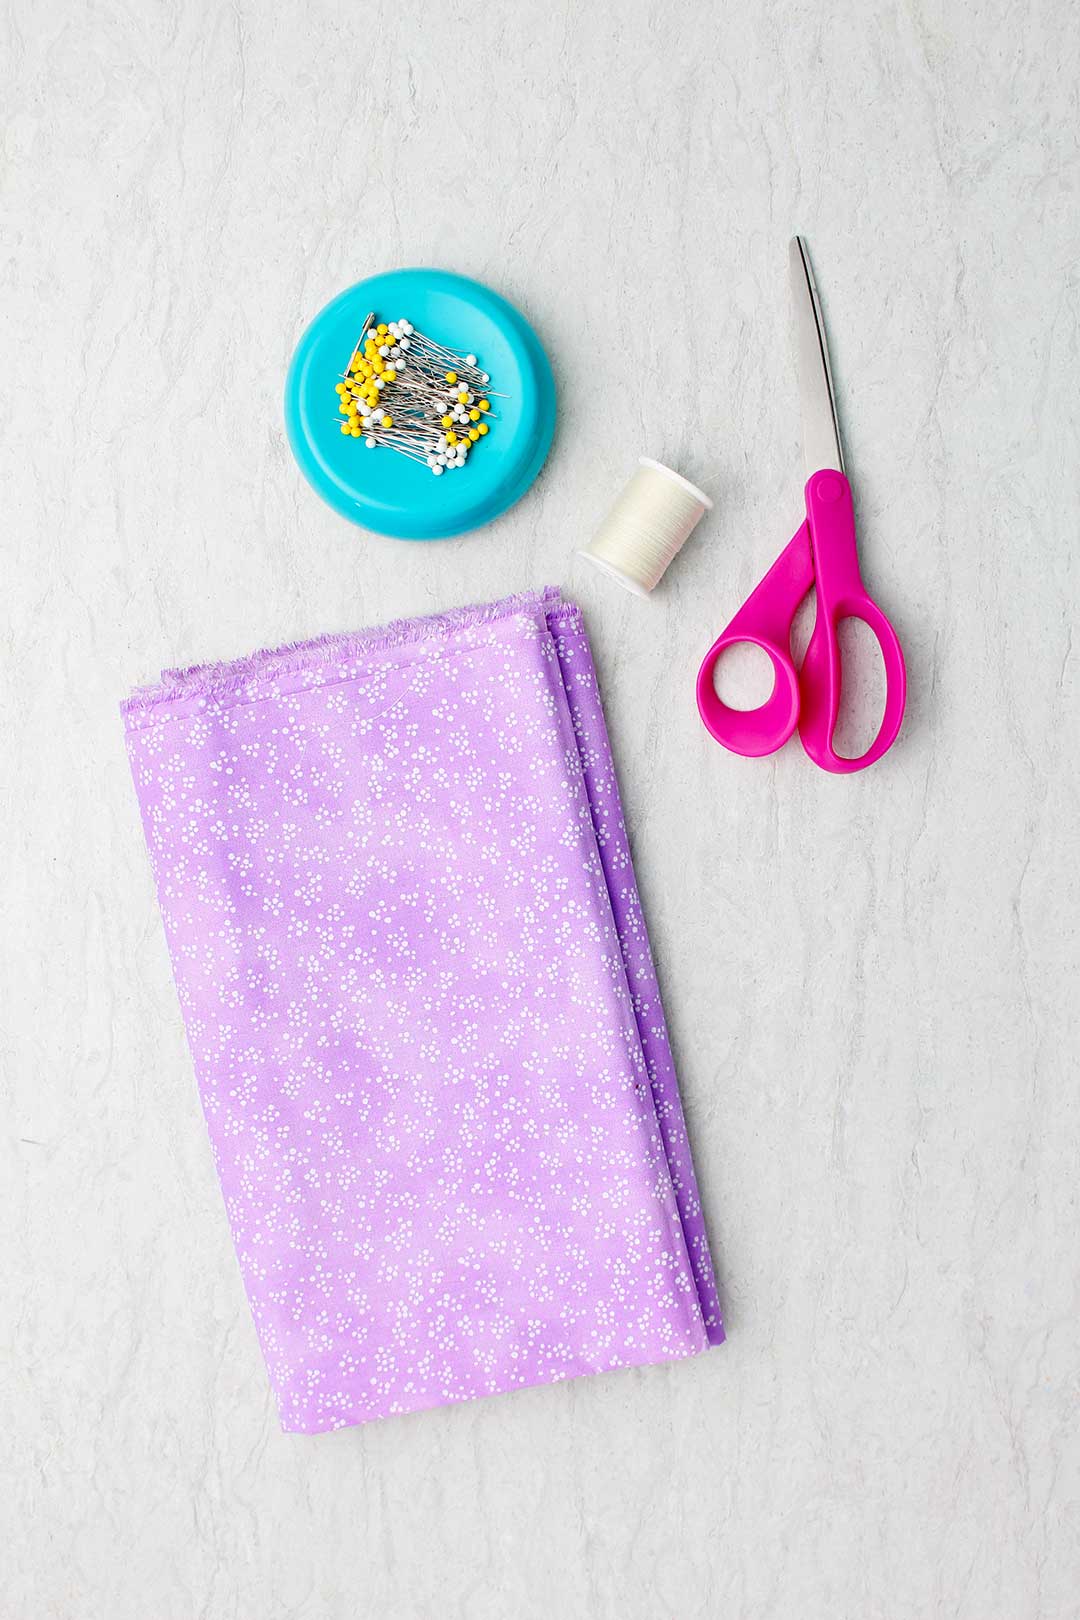 Purple fabric with white dots, white thread, pink scissors and a blue magnetic straight pin holder with pins.